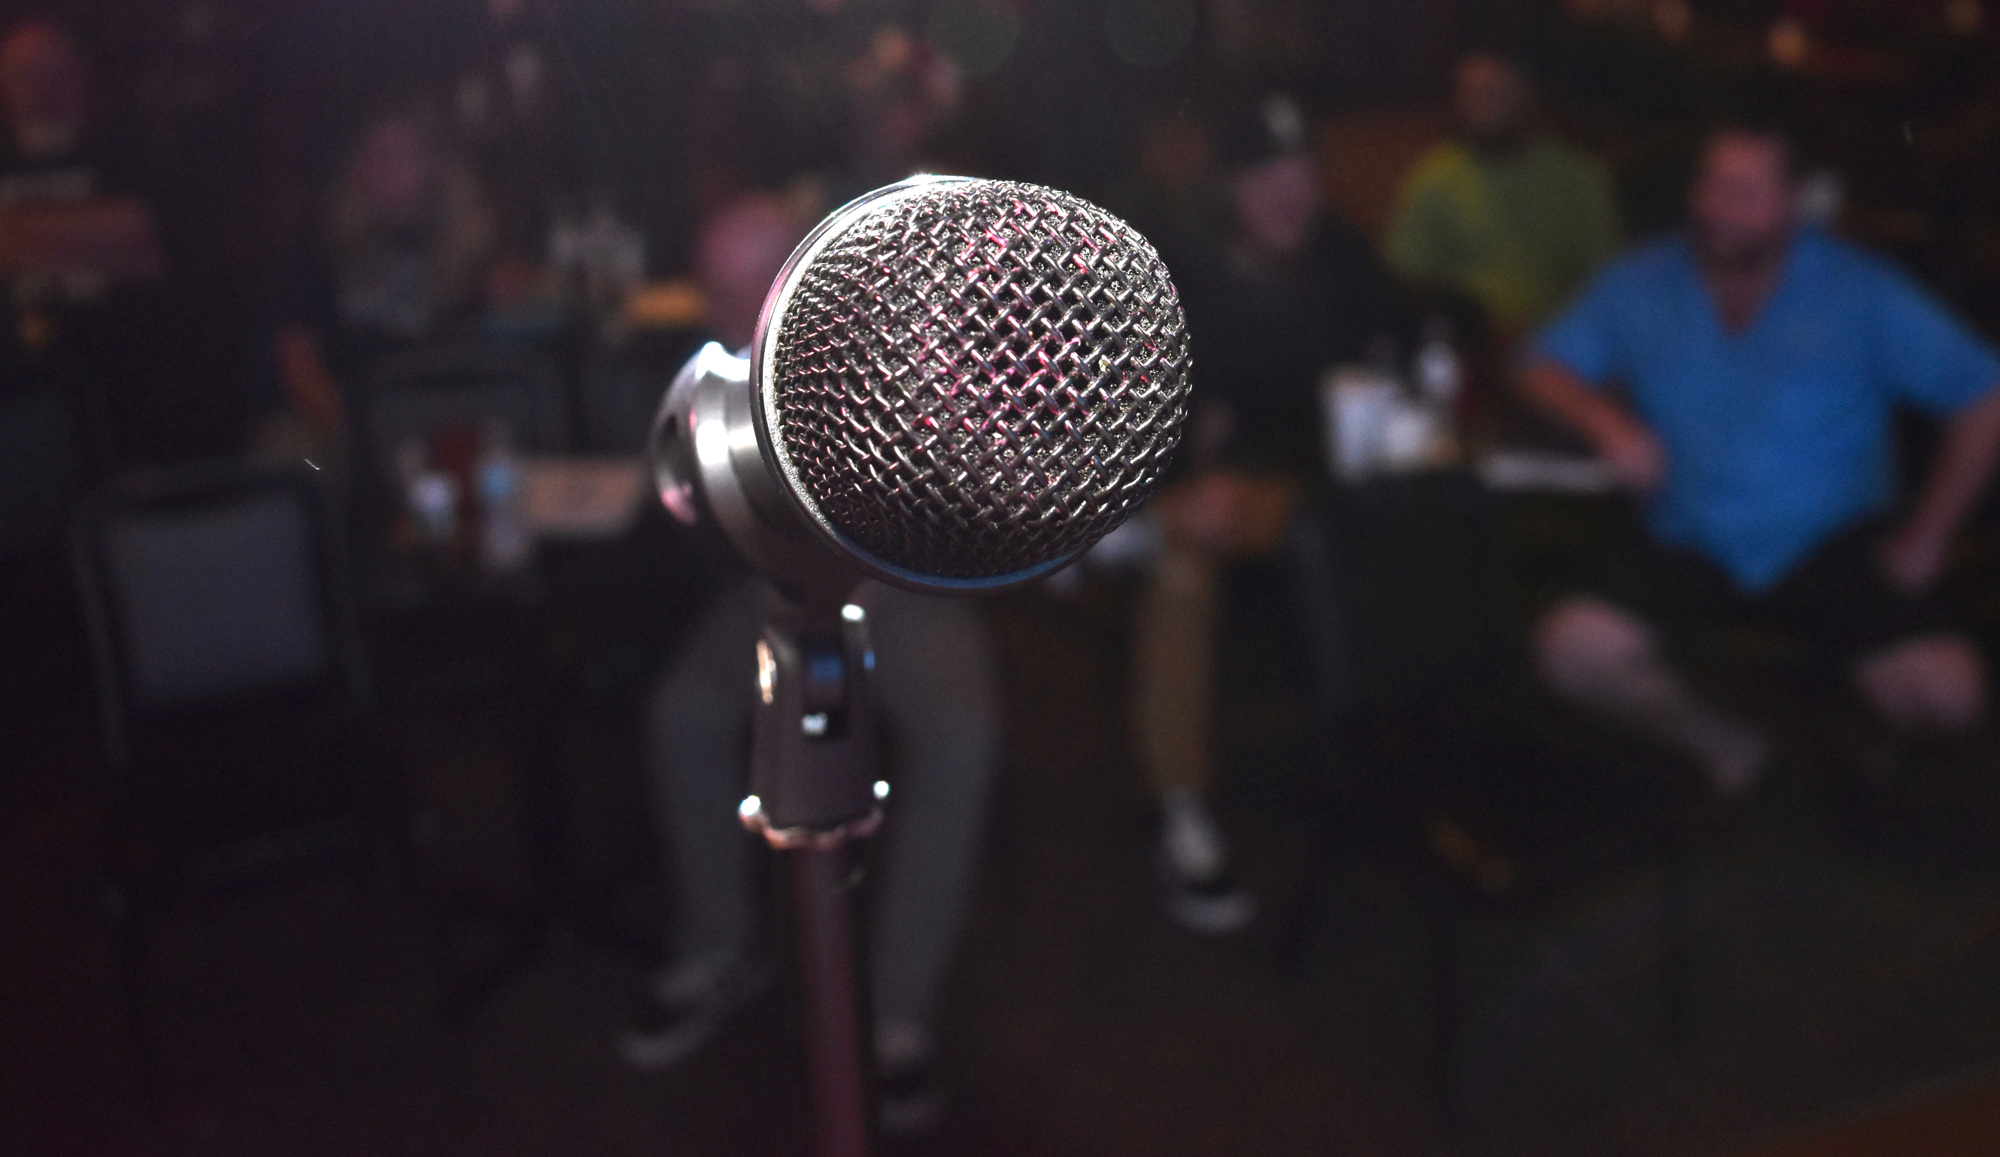 Each bootcamp participant will get a turn at the mic at the final performance on Aug. 30. Photo by Niki Kottmann